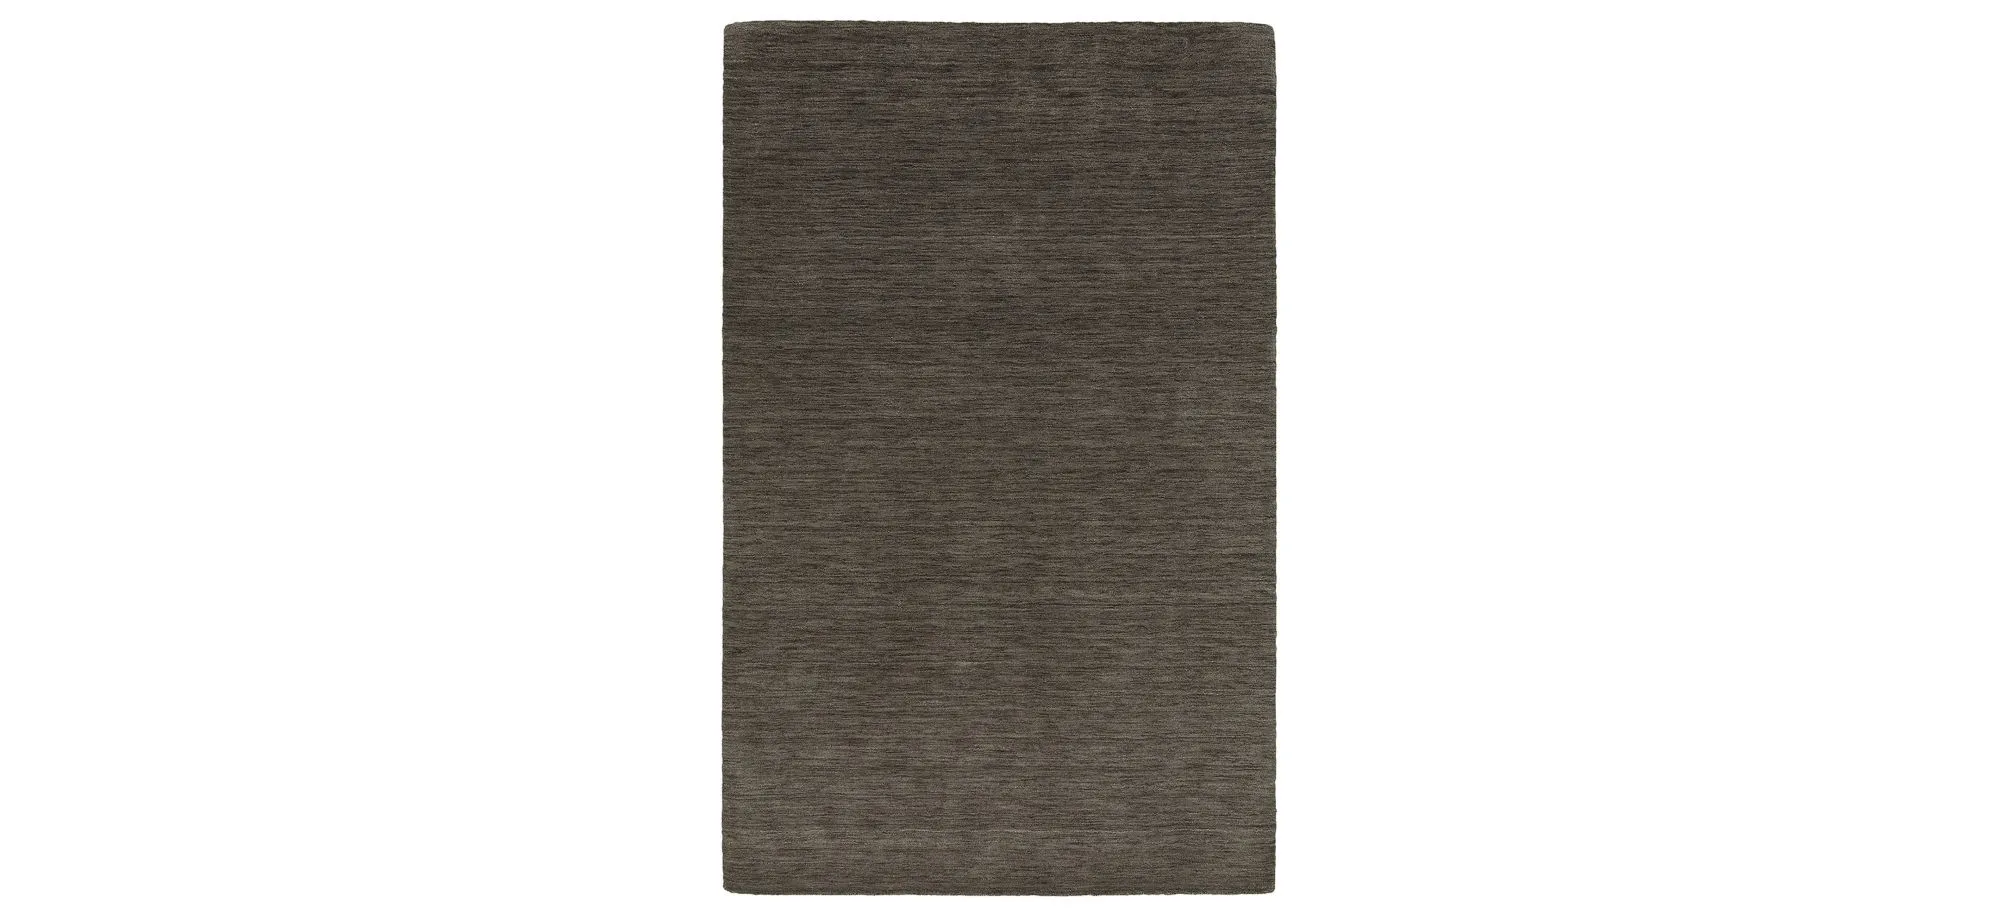 Chelsea Area Rug in Charcoal by Bellanest